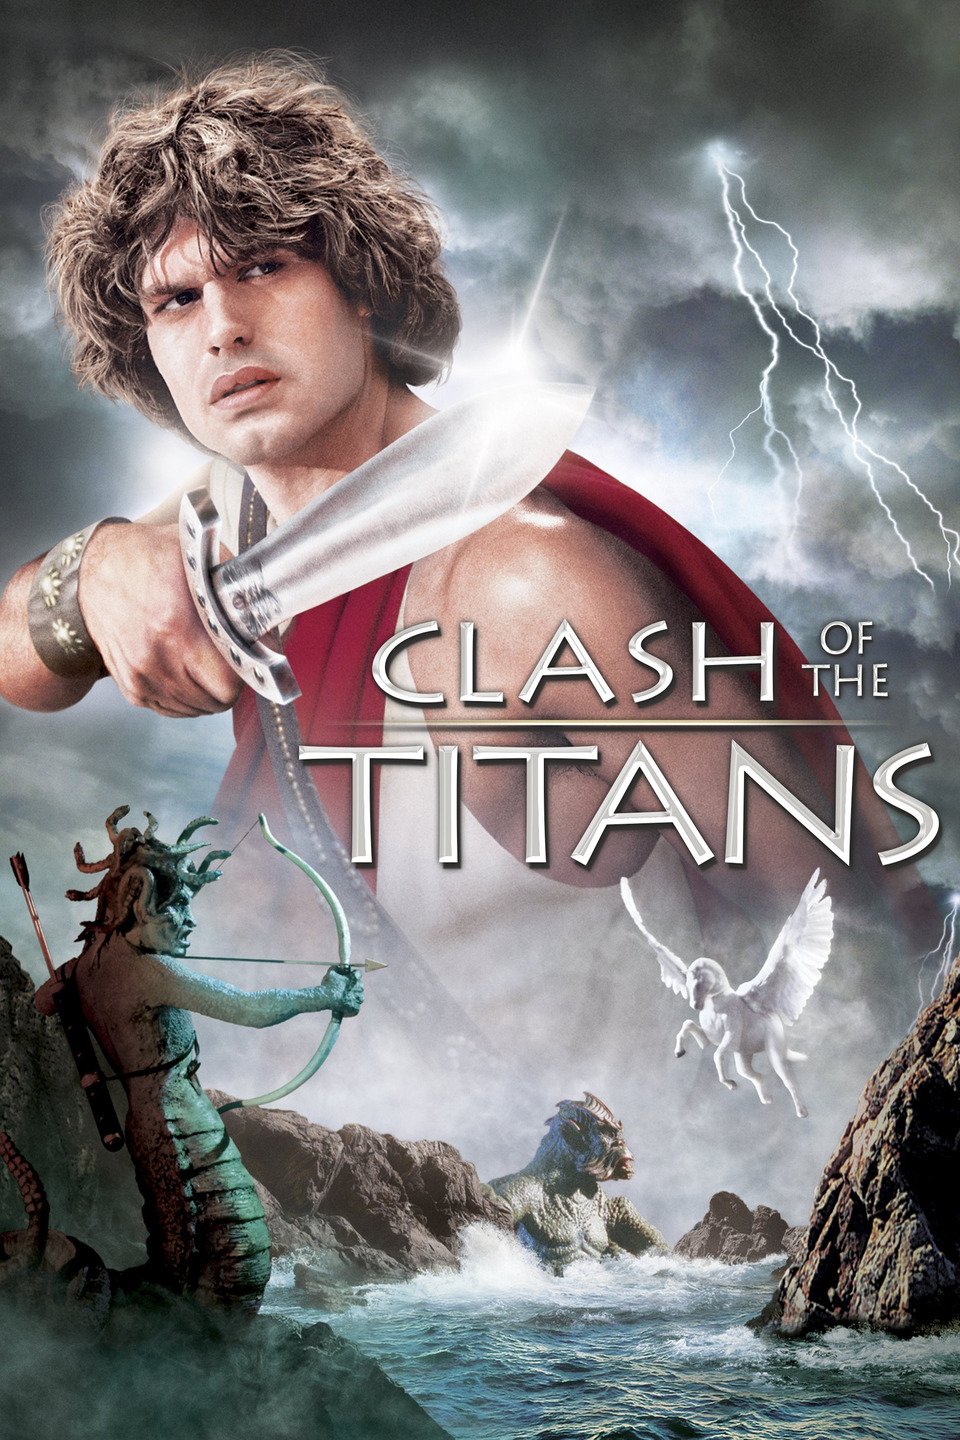 Clash of the Titans (1981) - Boring beyond belief - Ancient World